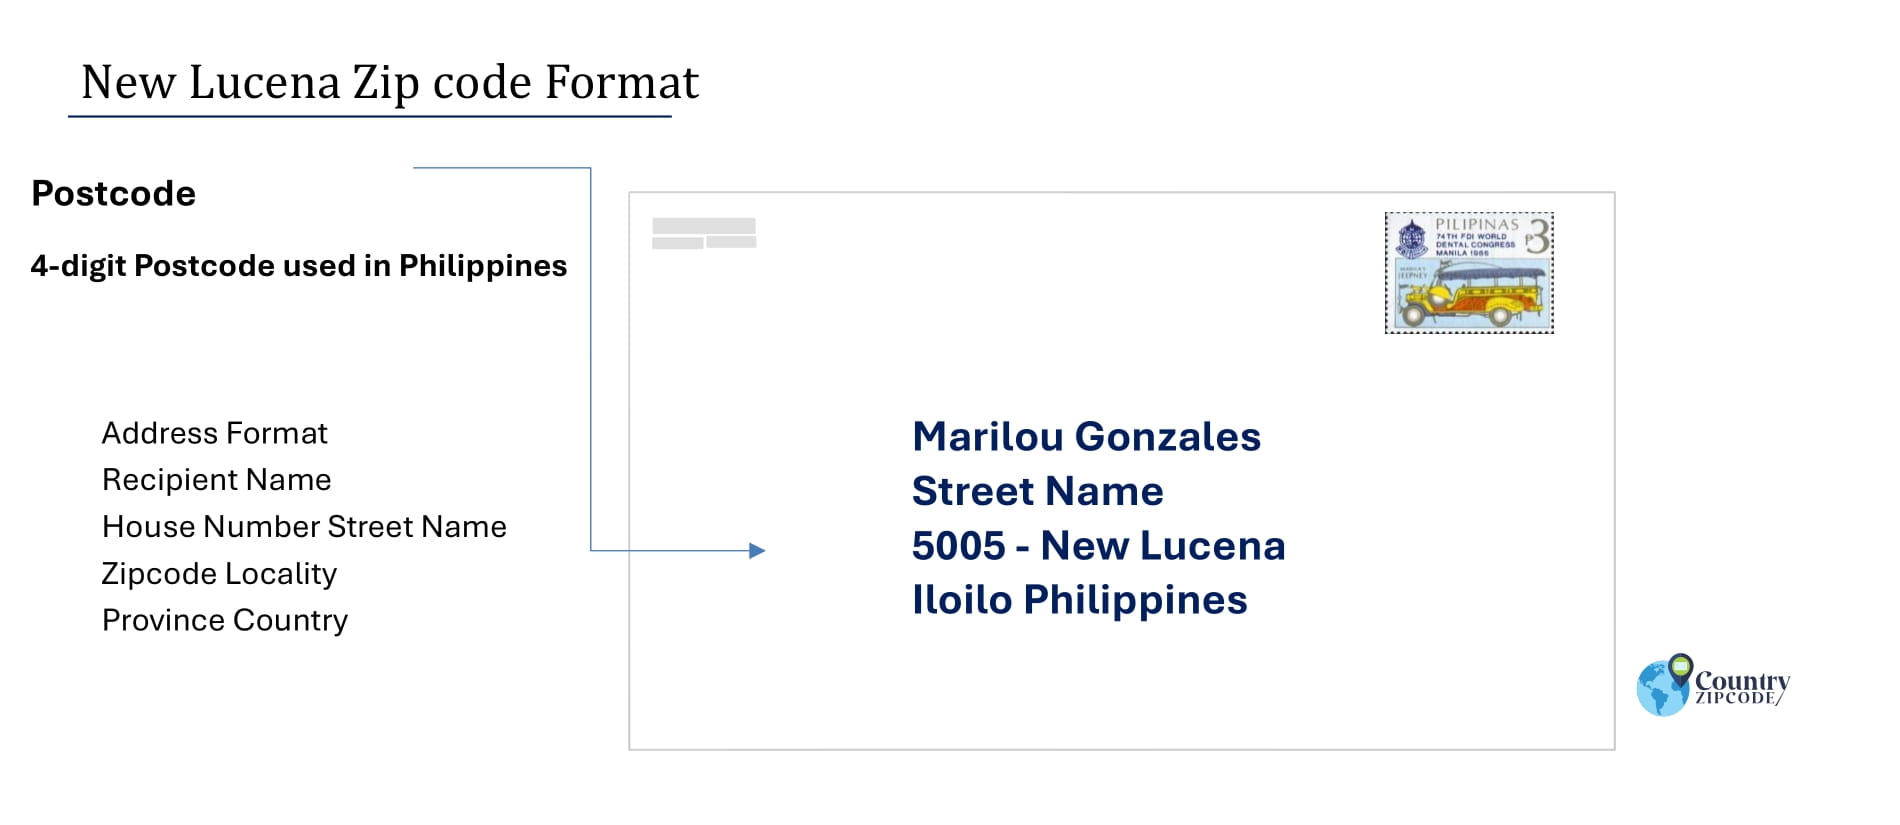 example of New Lucena Philippines zip code and address format